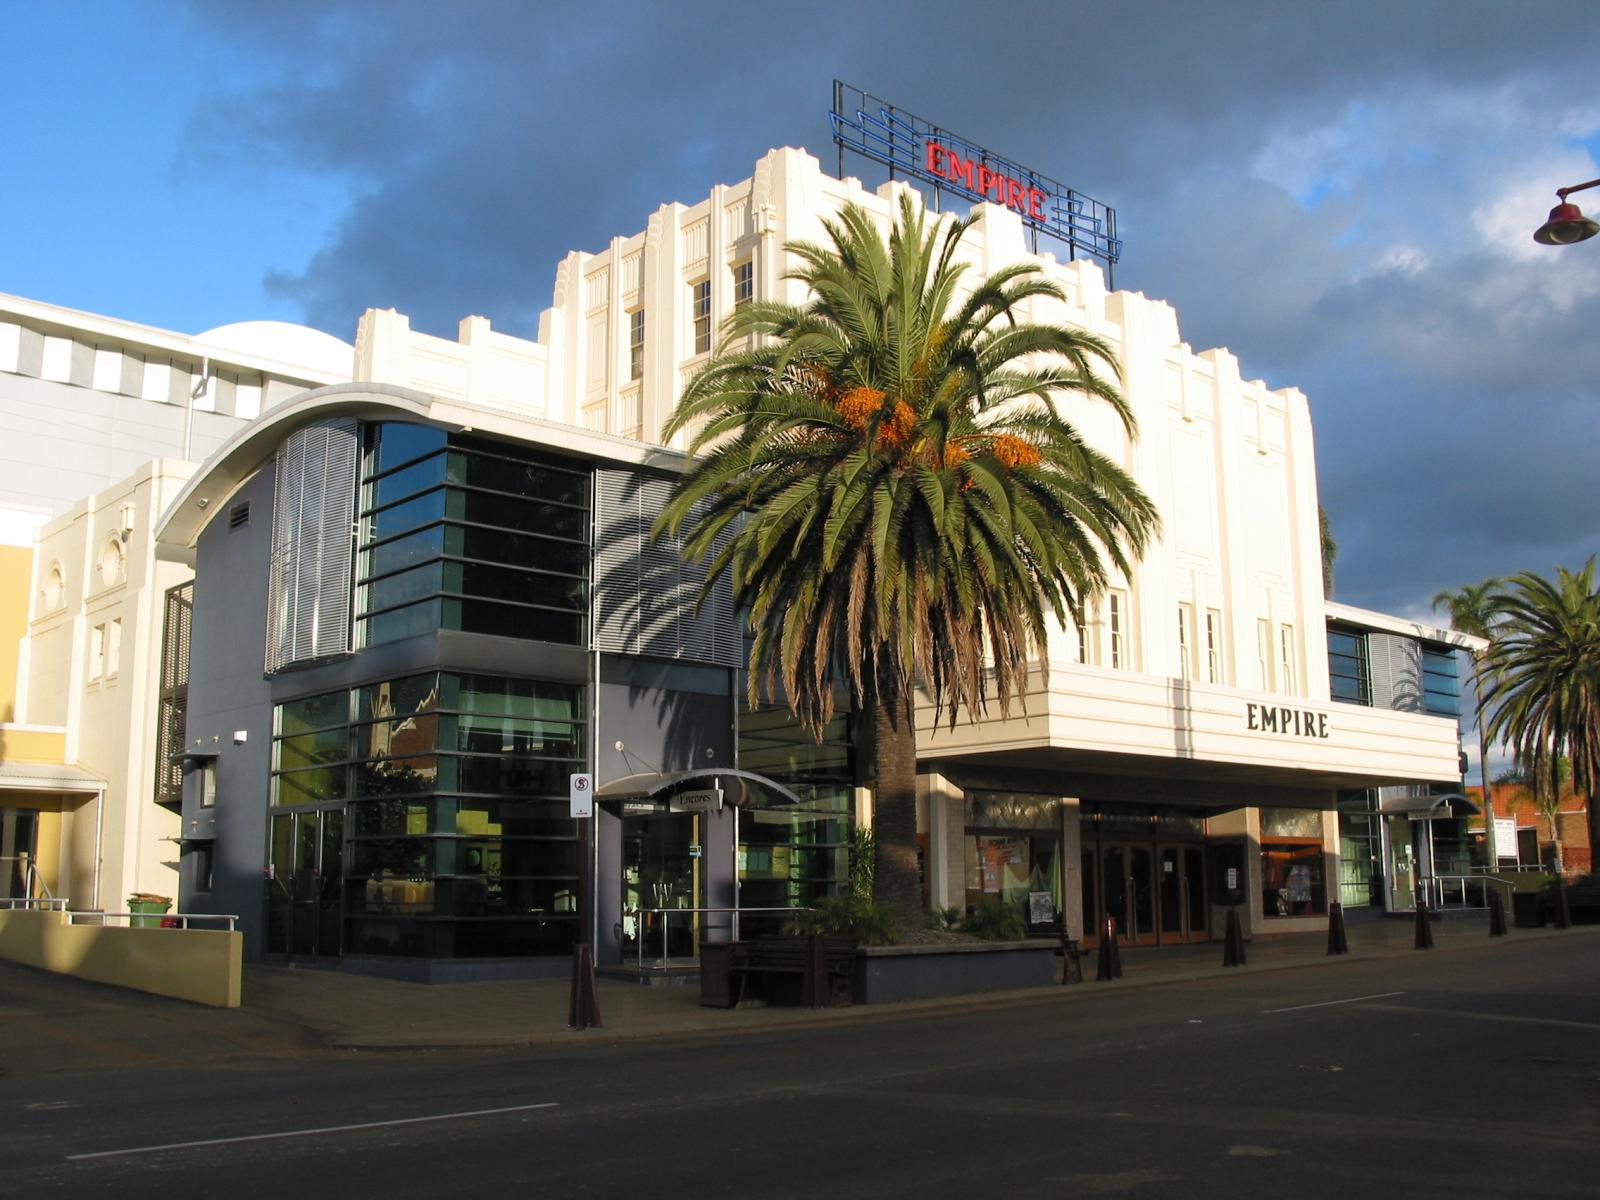 The Empire Theatre in Toowoomba Queensland